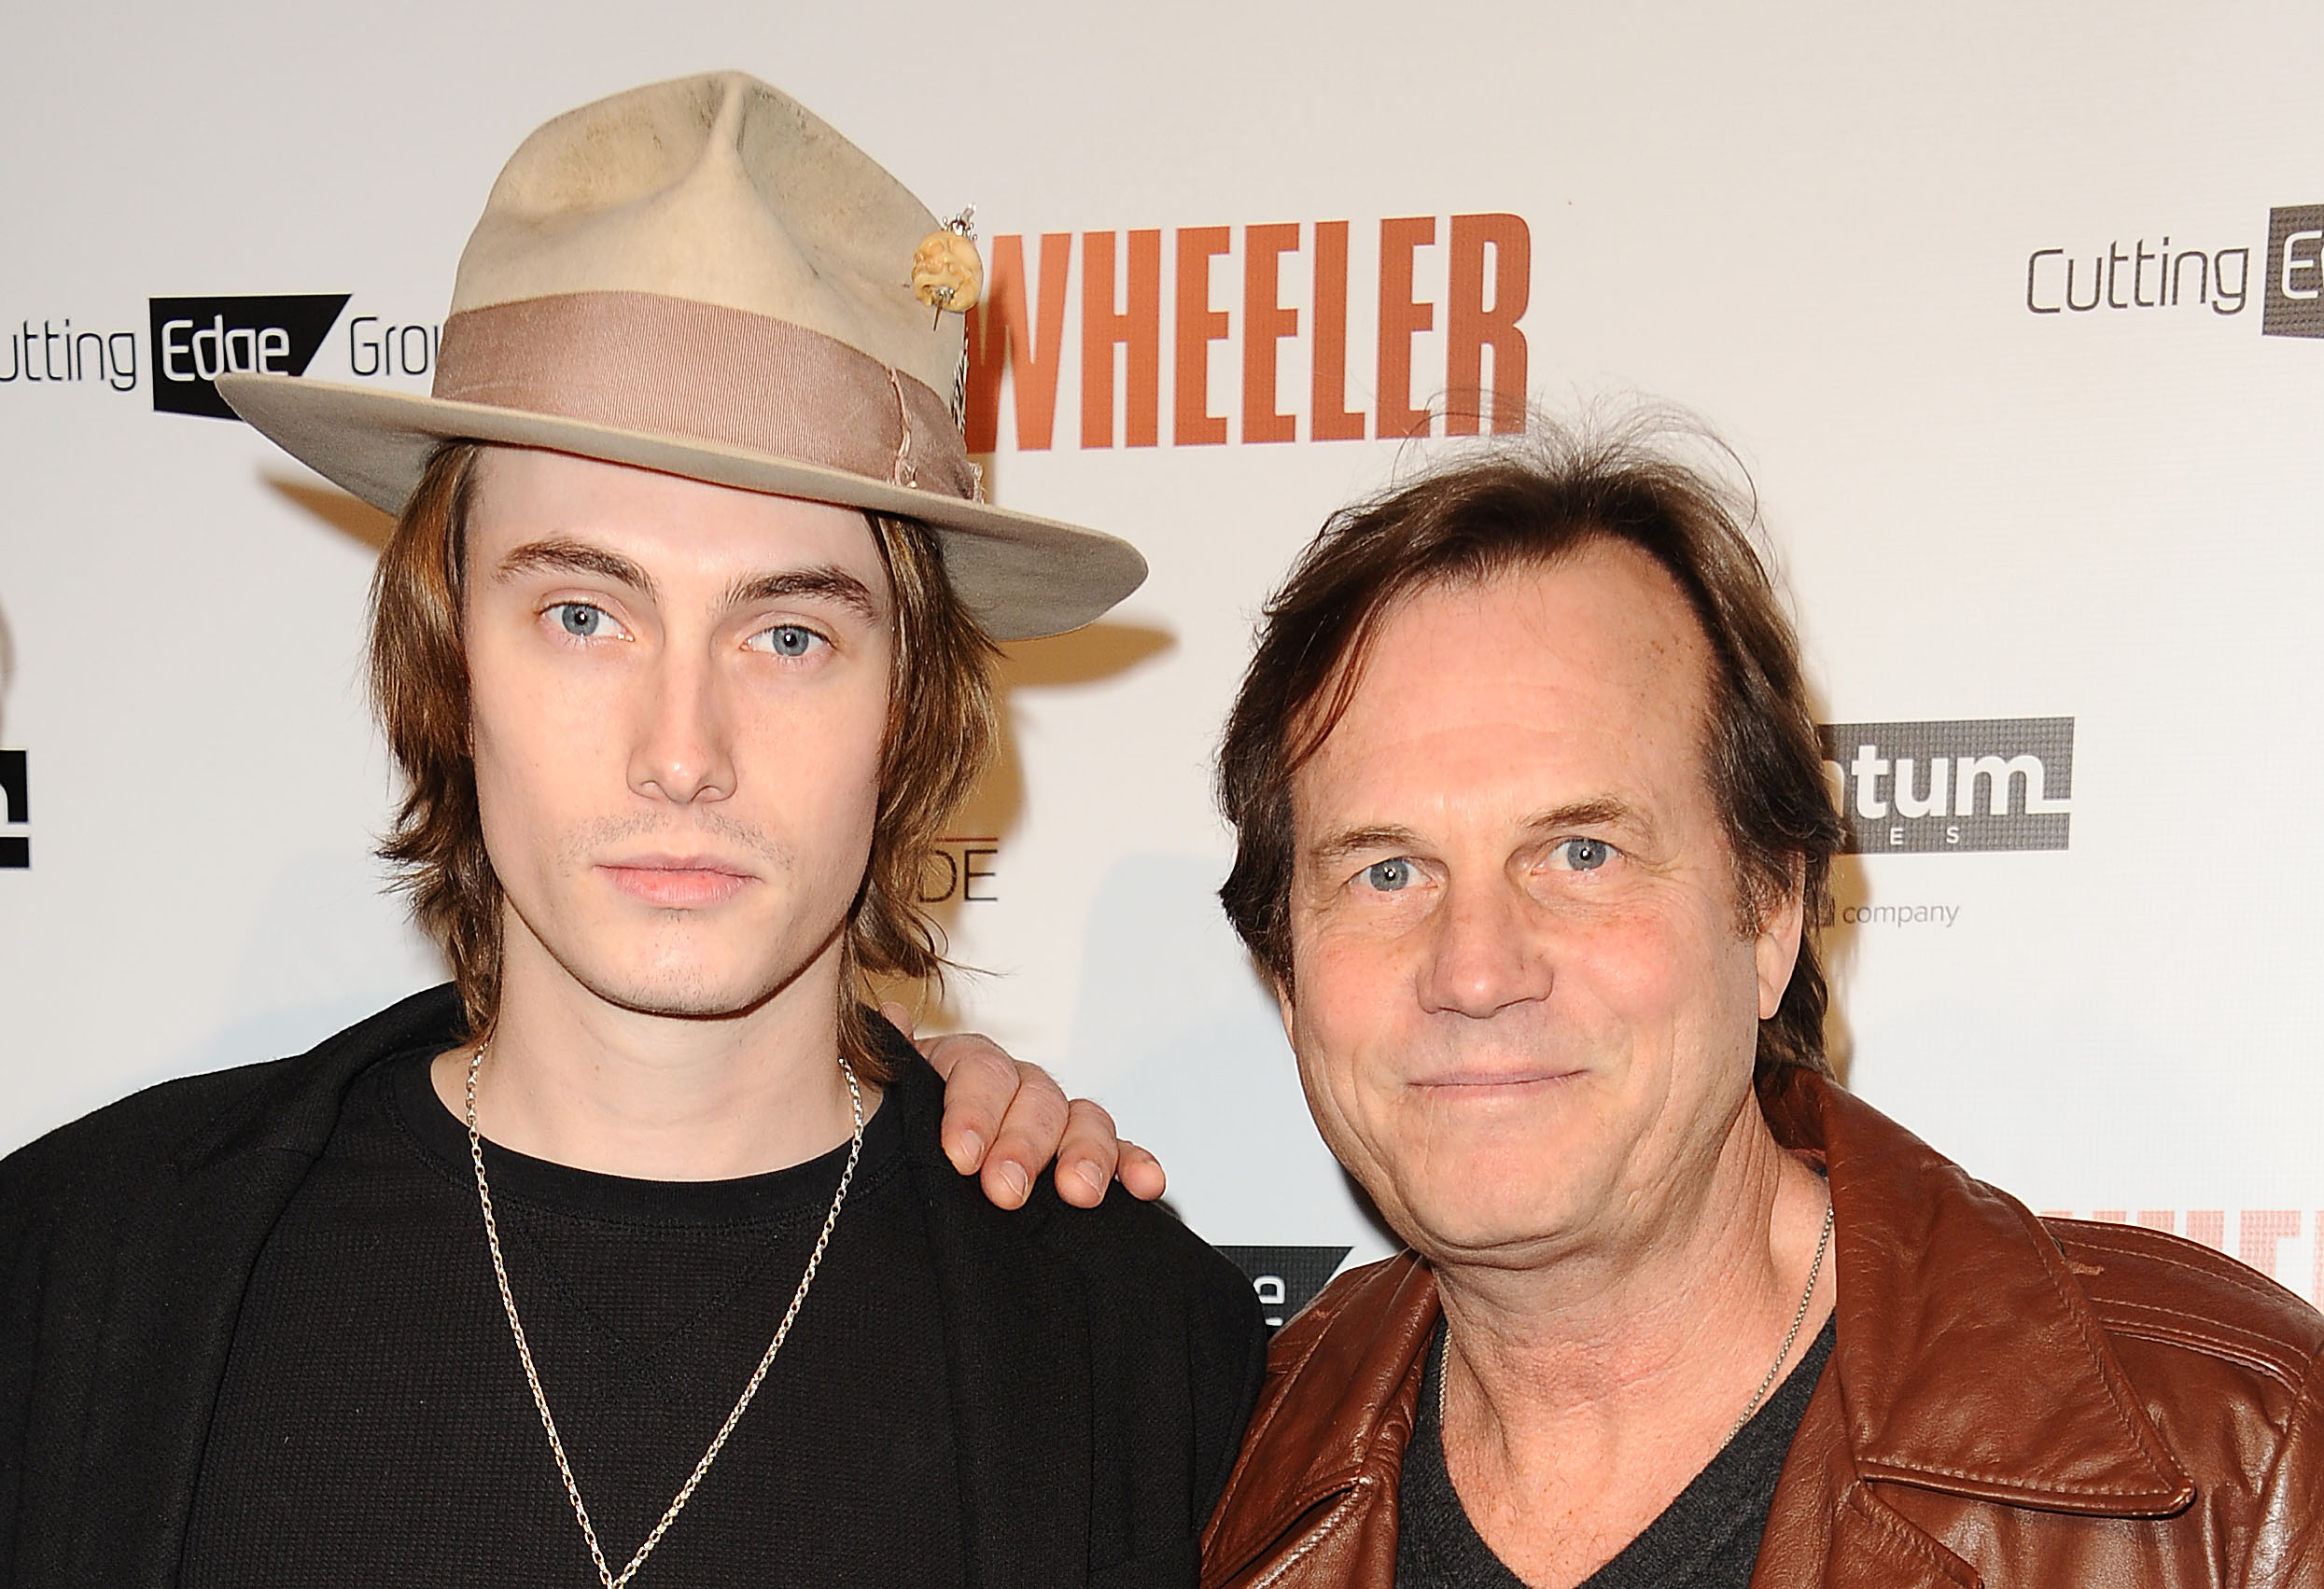 <p>Bill Paxton is seen here with son James Paxton (who was born in 1994) just a month before the "Titanic" actor's unexpected death at 61 following heart surgery and a stroke in 2017. James has followed in his father's acting footsteps: He's starred on the USA series "Eyewitness" and in 2020 played a younger version of his dad's character on the final season of the hit series "Agents of S.H.I.E.L.D" (seen <a href="https://www.marvel.com/articles/tv-shows/agents-of-shield-james-paxton-john-garrett-season-7">here</a>). "He would really be over the moon about it. He would be hooting and hollering about this one, for sure," James told Marvel of the 2020 role.</p>